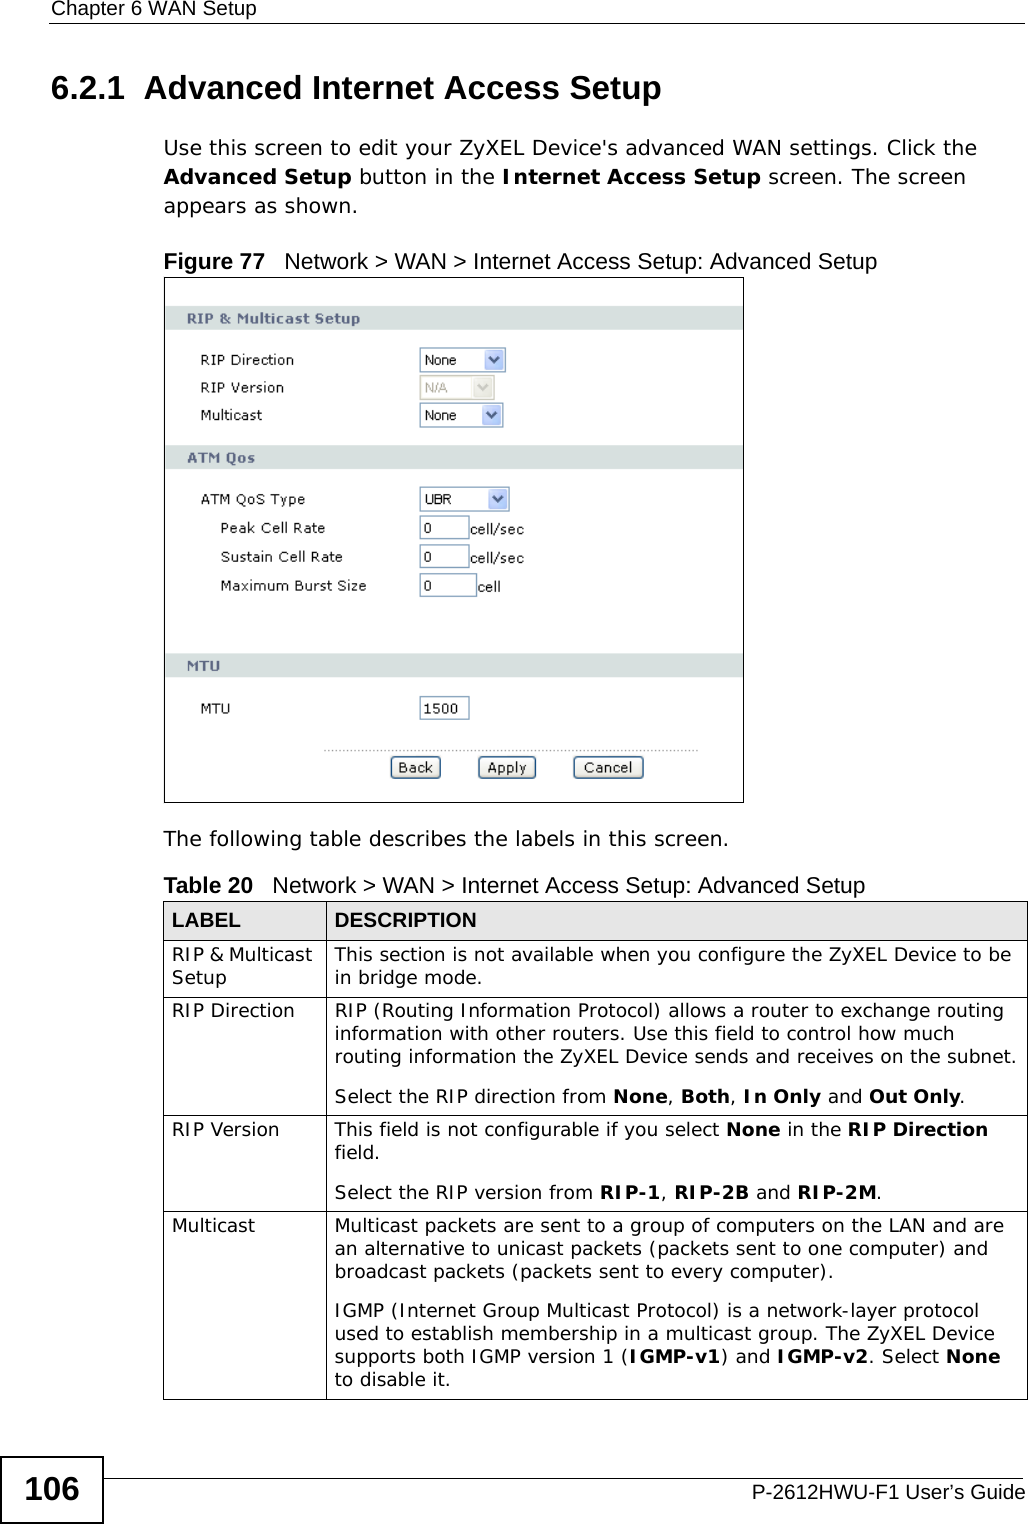 Chapter 6 WAN SetupP-2612HWU-F1 User’s Guide1066.2.1  Advanced Internet Access Setup Use this screen to edit your ZyXEL Device&apos;s advanced WAN settings. Click the Advanced Setup button in the Internet Access Setup screen. The screen appears as shown.Figure 77   Network &gt; WAN &gt; Internet Access Setup: Advanced SetupThe following table describes the labels in this screen.  Table 20   Network &gt; WAN &gt; Internet Access Setup: Advanced SetupLABEL DESCRIPTIONRIP &amp; Multicast Setup This section is not available when you configure the ZyXEL Device to be in bridge mode.RIP Direction RIP (Routing Information Protocol) allows a router to exchange routing information with other routers. Use this field to control how much routing information the ZyXEL Device sends and receives on the subnet.Select the RIP direction from None, Both, In Only and Out Only.RIP Version This field is not configurable if you select None in the RIP Direction field.Select the RIP version from RIP-1, RIP-2B and RIP-2M.Multicast Multicast packets are sent to a group of computers on the LAN and are an alternative to unicast packets (packets sent to one computer) and broadcast packets (packets sent to every computer).IGMP (Internet Group Multicast Protocol) is a network-layer protocol used to establish membership in a multicast group. The ZyXEL Device supports both IGMP version 1 (IGMP-v1) and IGMP-v2. Select None to disable it.